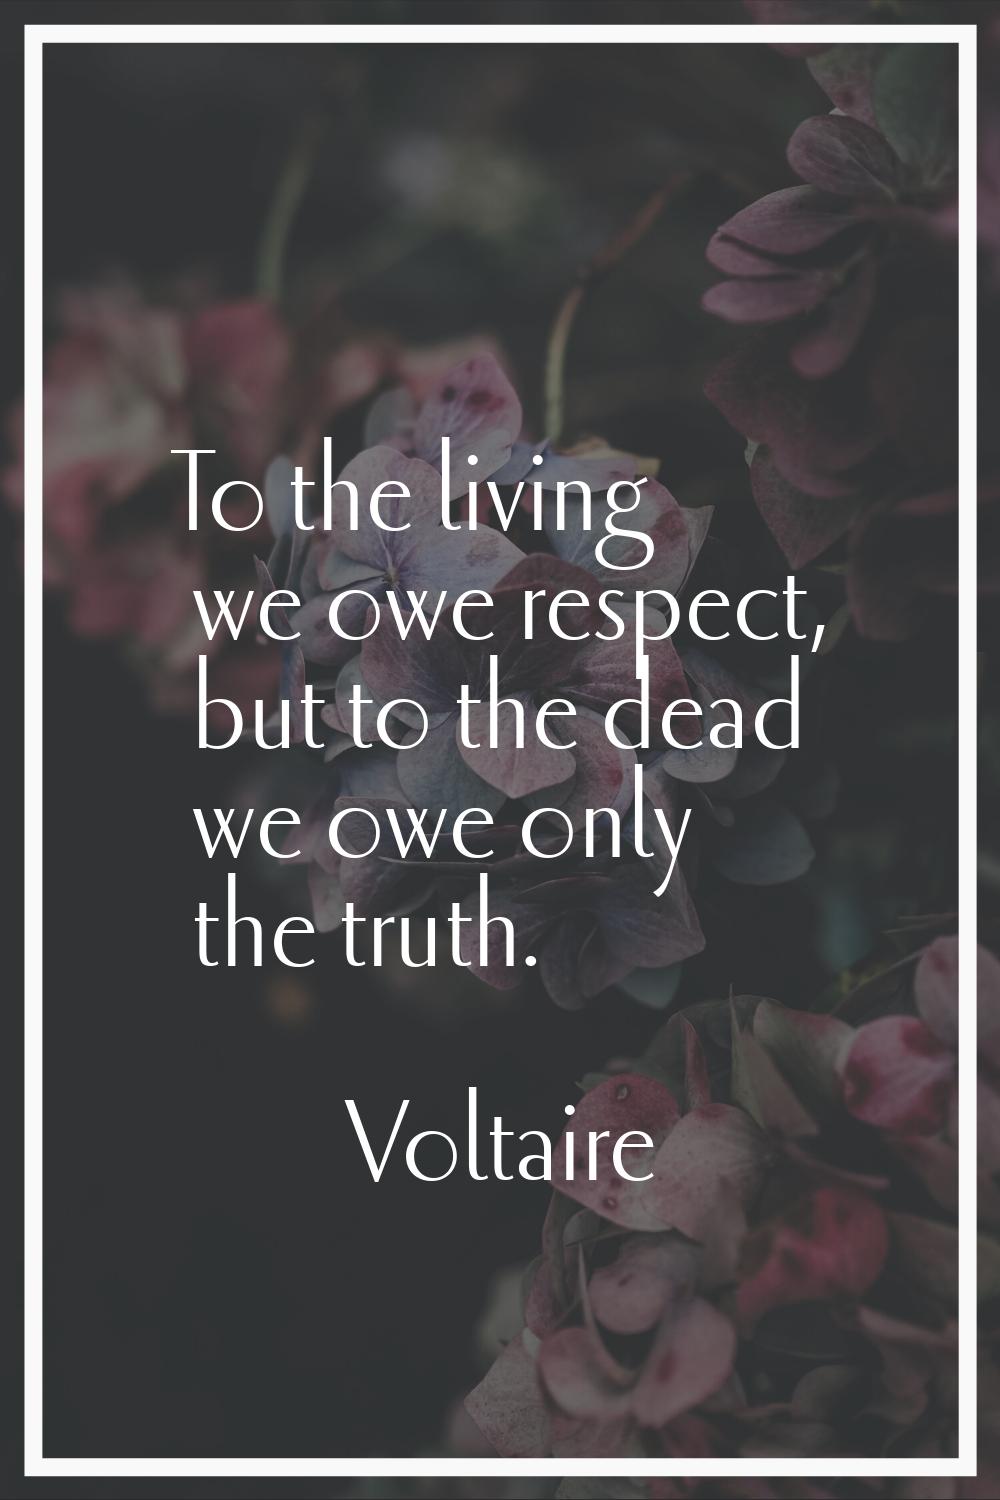 To the living we owe respect, but to the dead we owe only the truth.